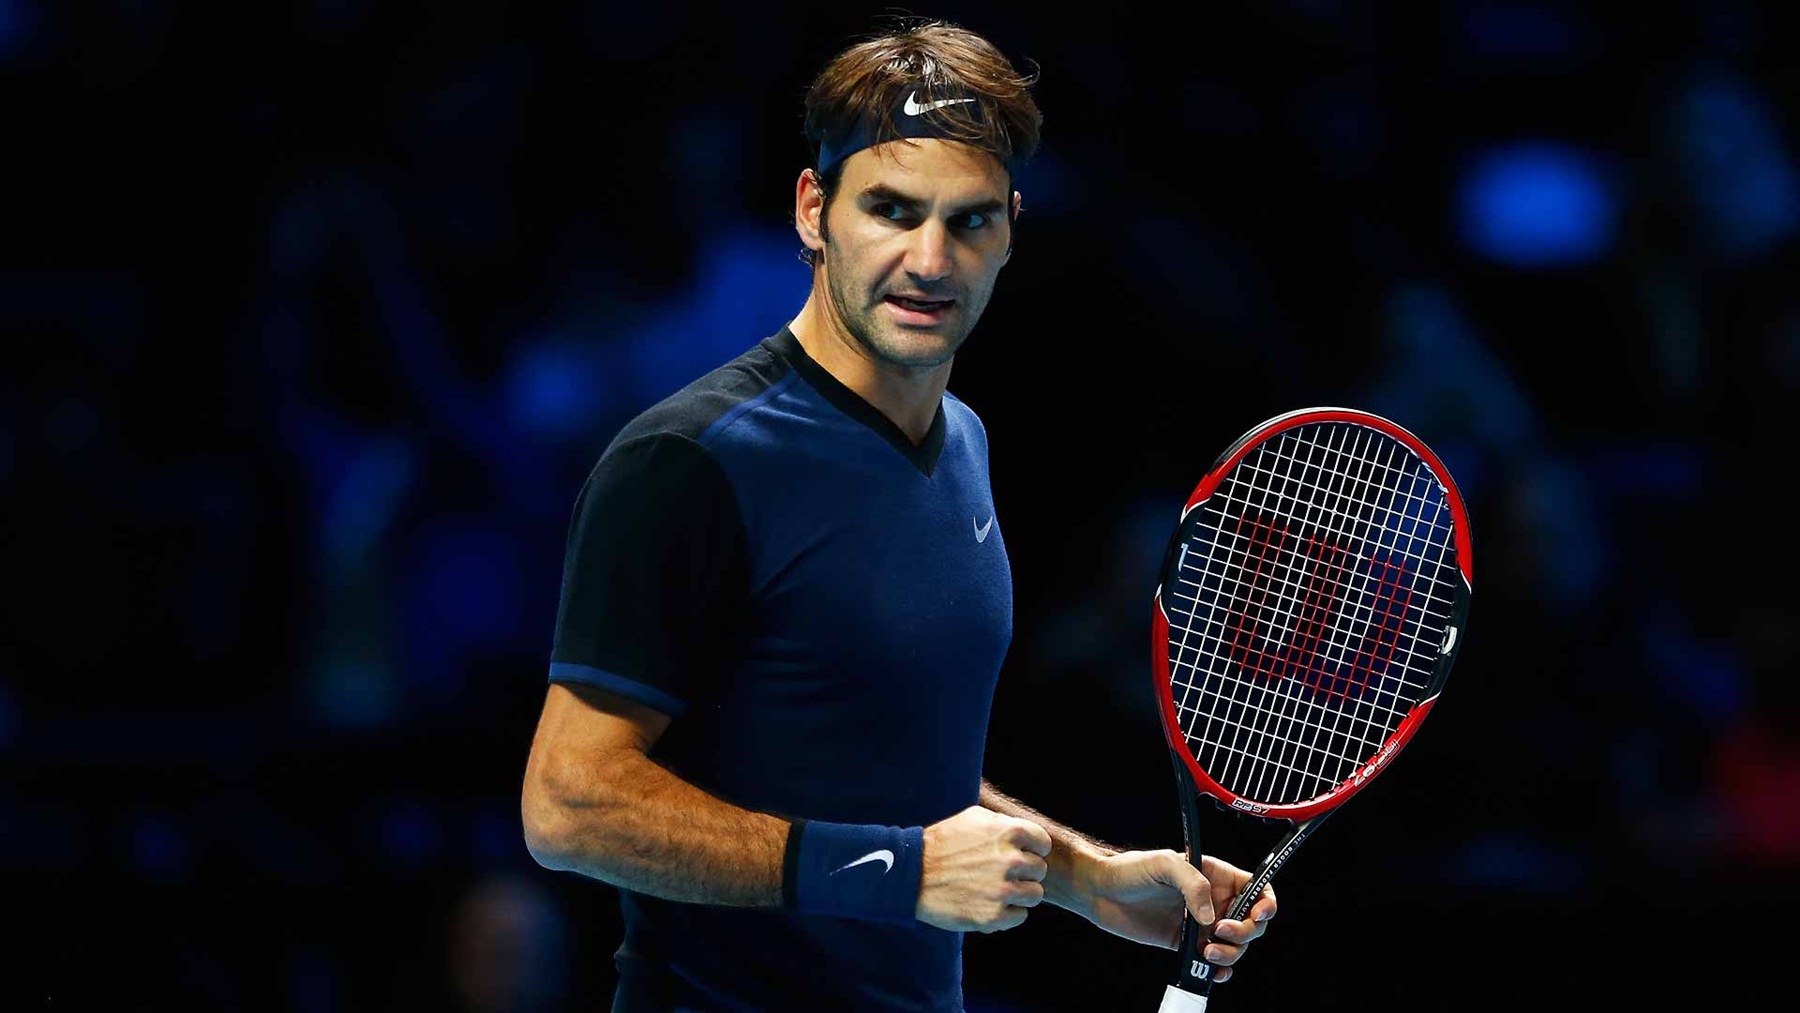 title roger 039 s to lose barring a major surprise by some of tournament 039 s several young talents federer is expected to win the us open at a canter photo afp